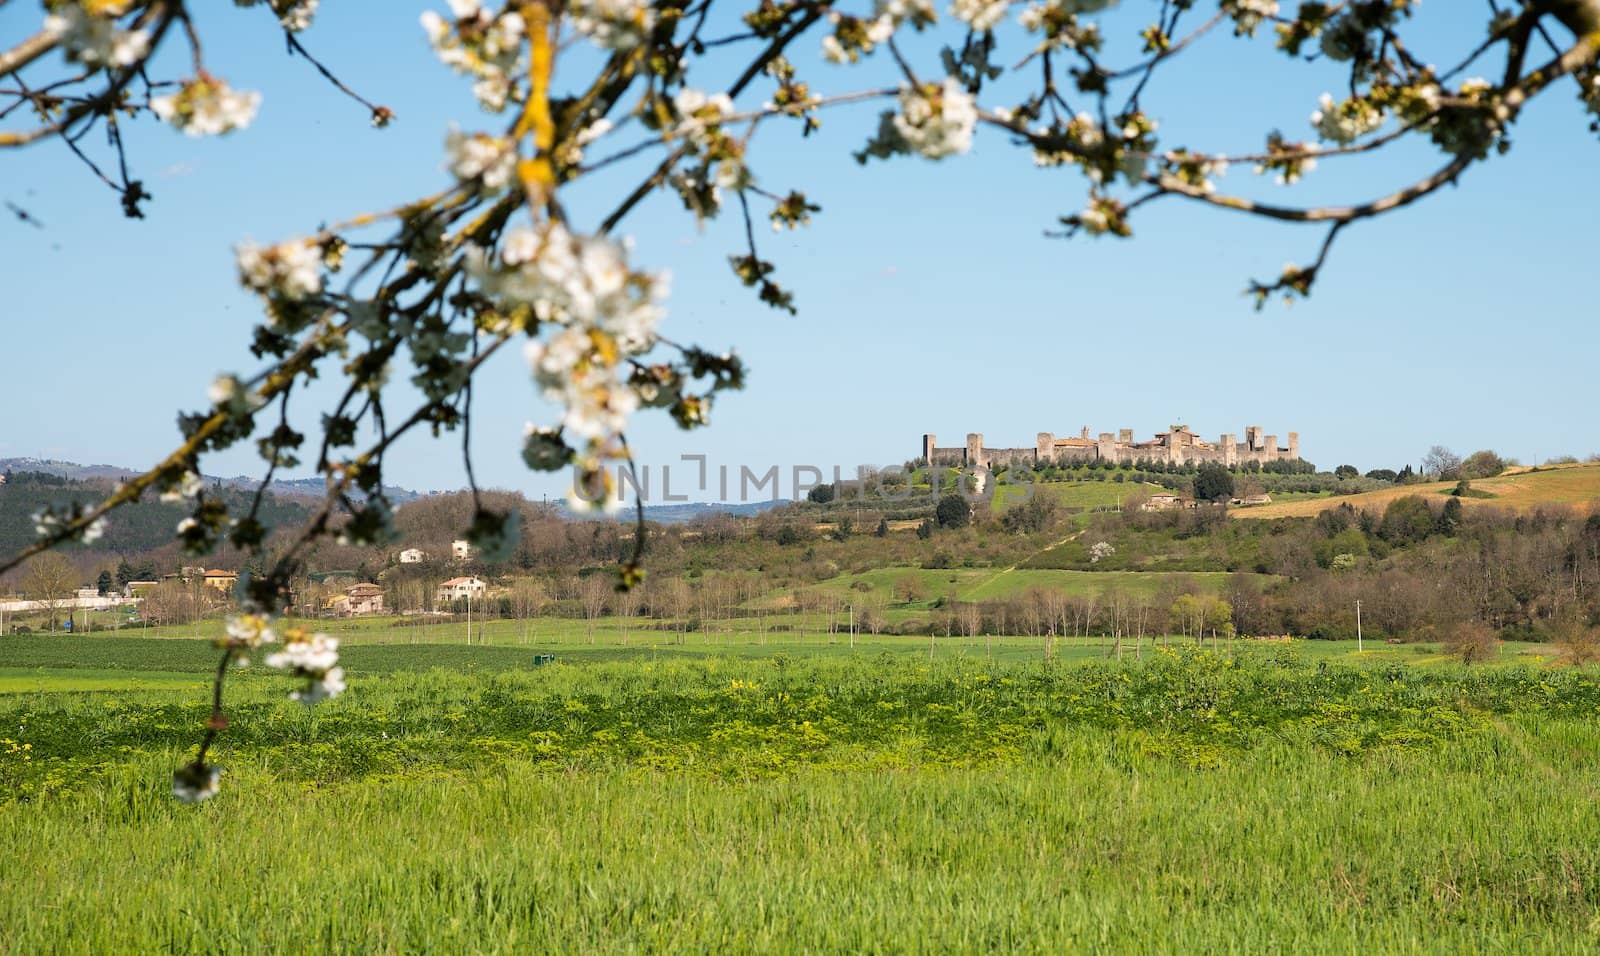 A postcard from the castle of Monteriggioni in Tuscany